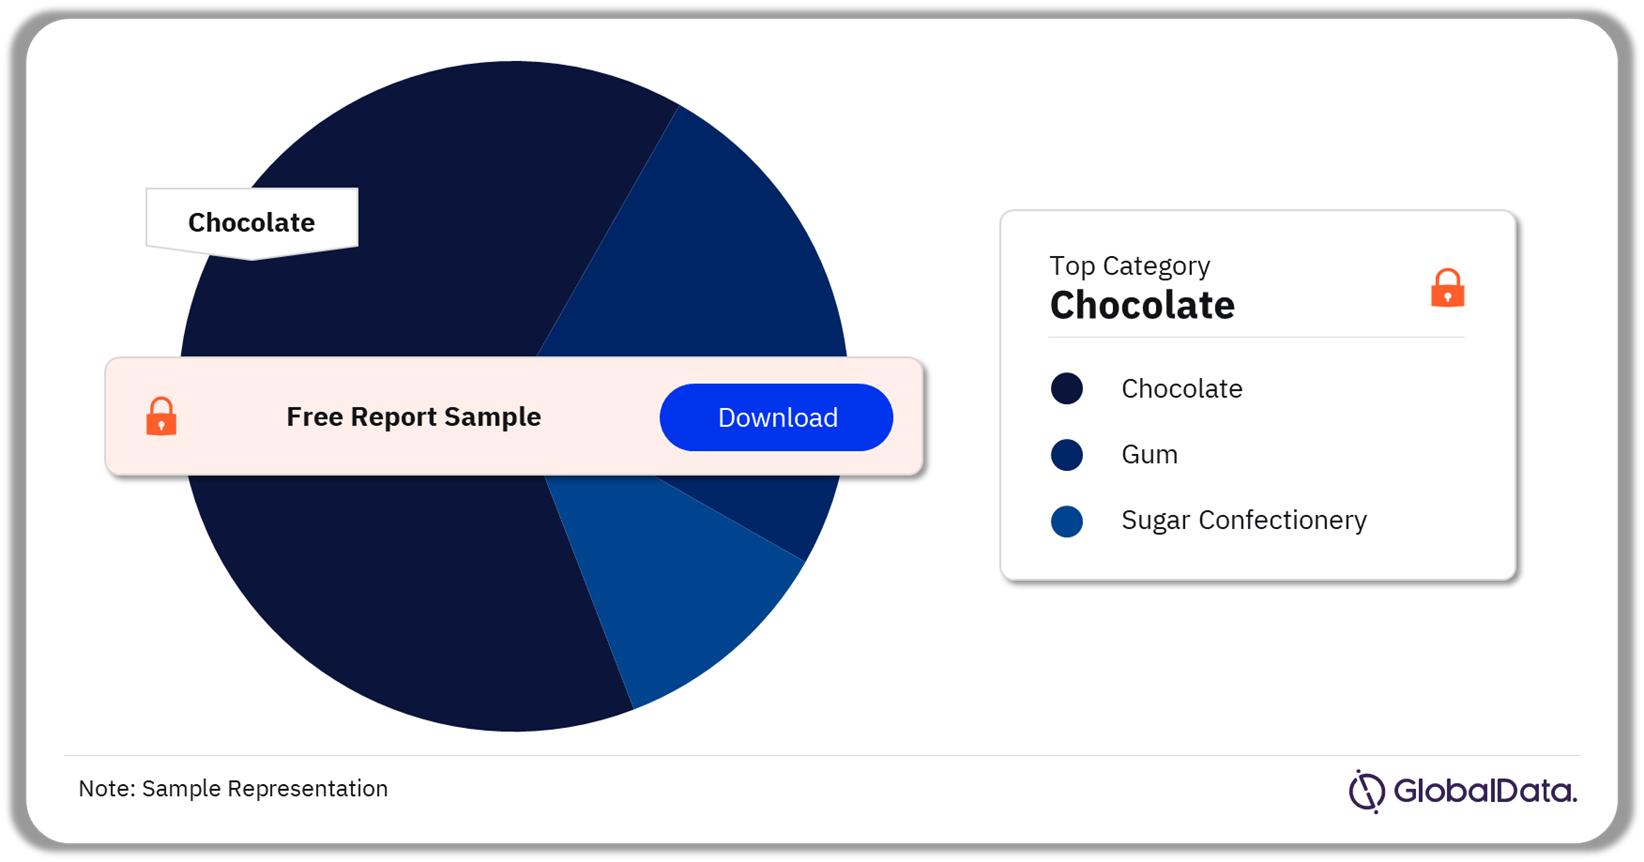 US Confectionery Market Analysis by Categories, 2022 (%)